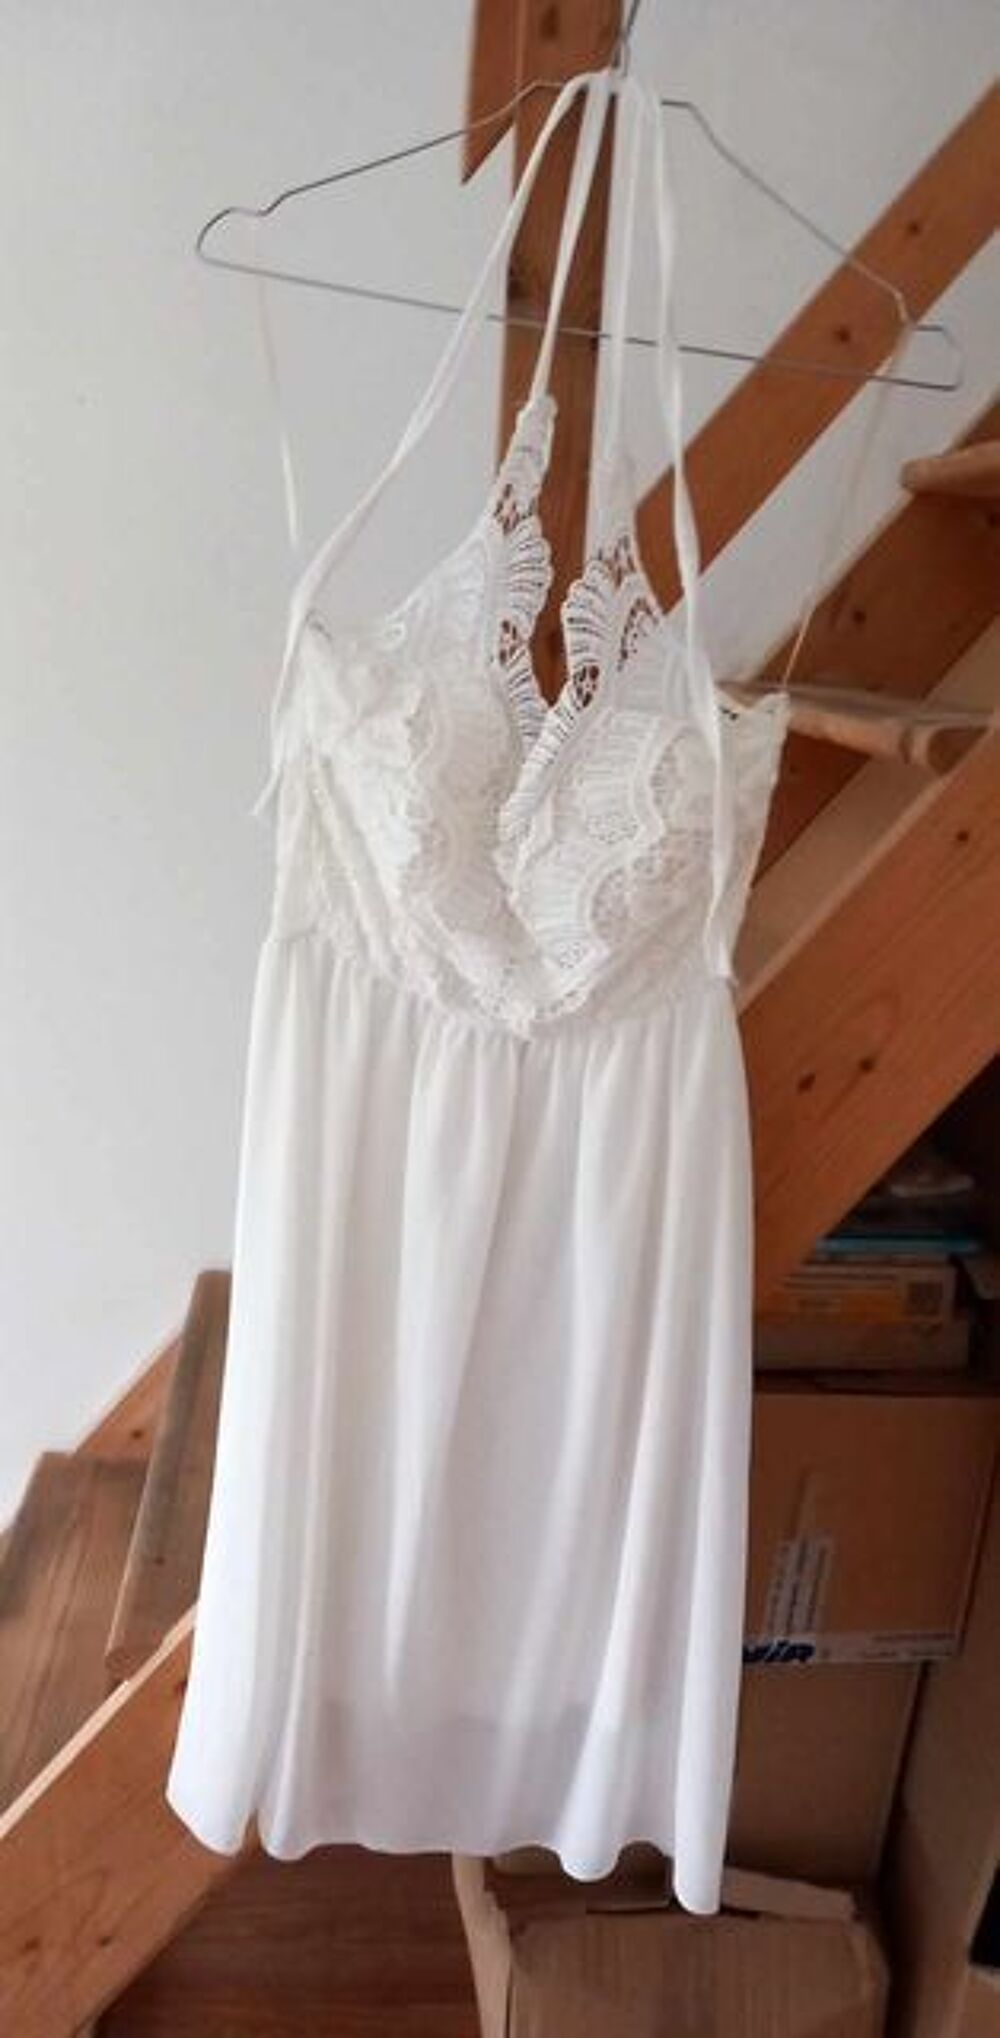 Robe blanche dos nu
Vtements